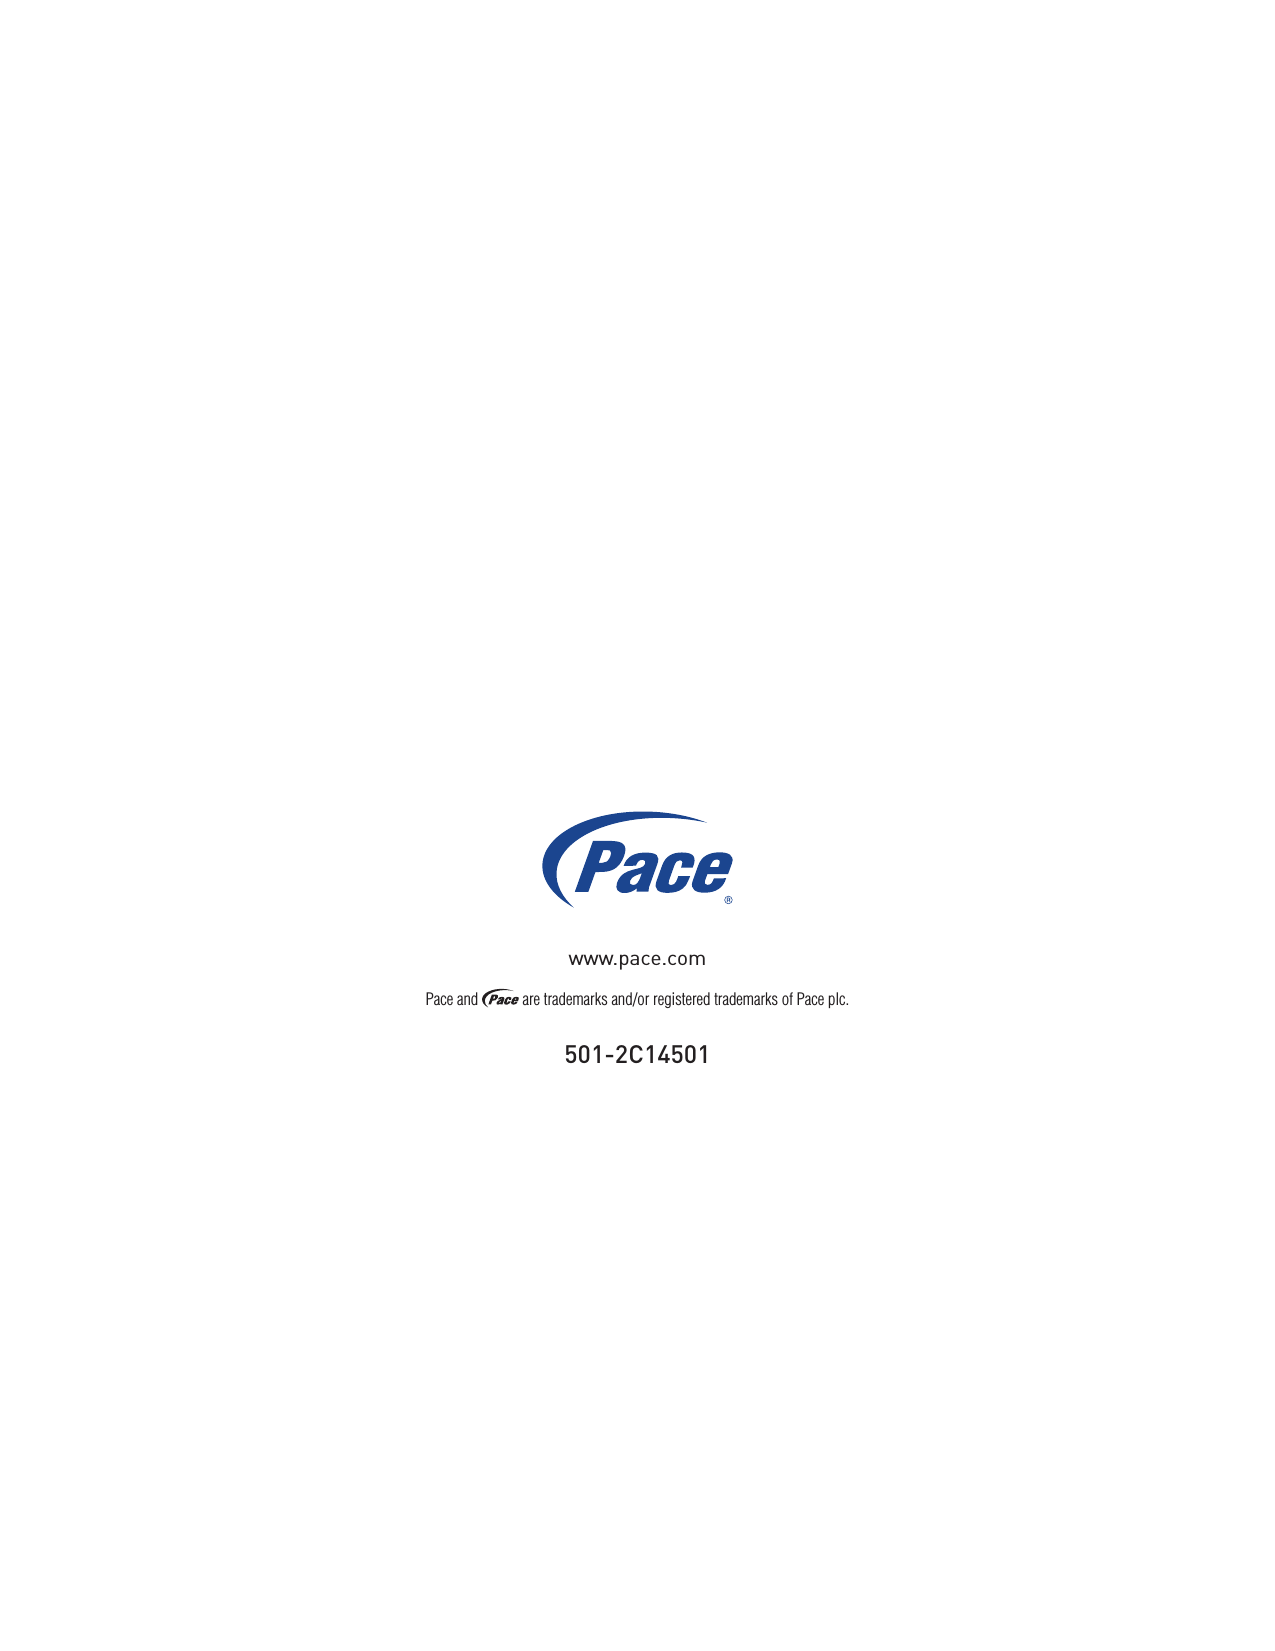 501-2C14501Pace and   are trademarks and/or registered trademarks of Pace plc.www.pace.com